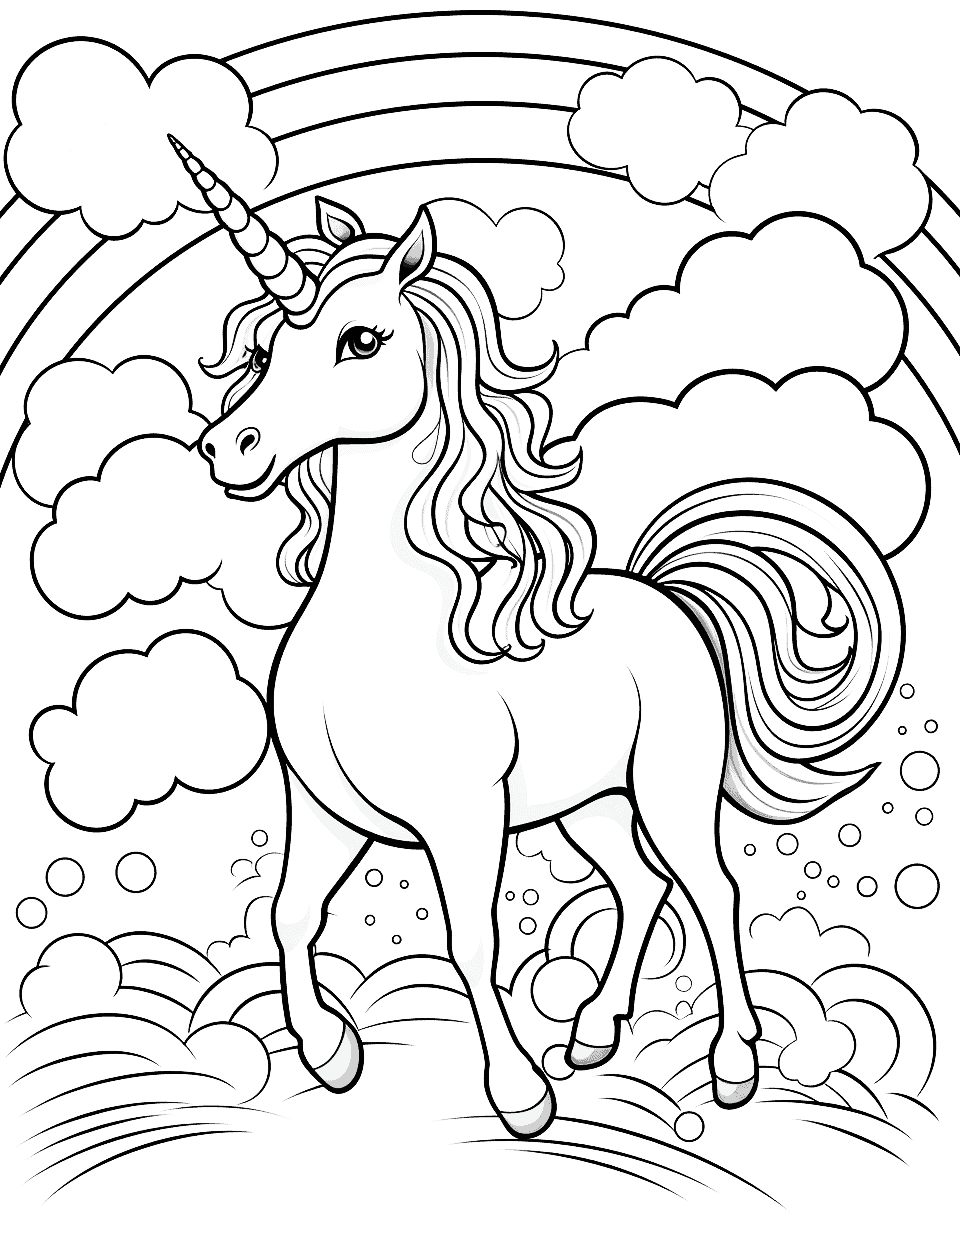 Rainbow Connection Coloring Page - An image of a unicorn leaping across a rainbow in the sky, surrounded by fluffy clouds.